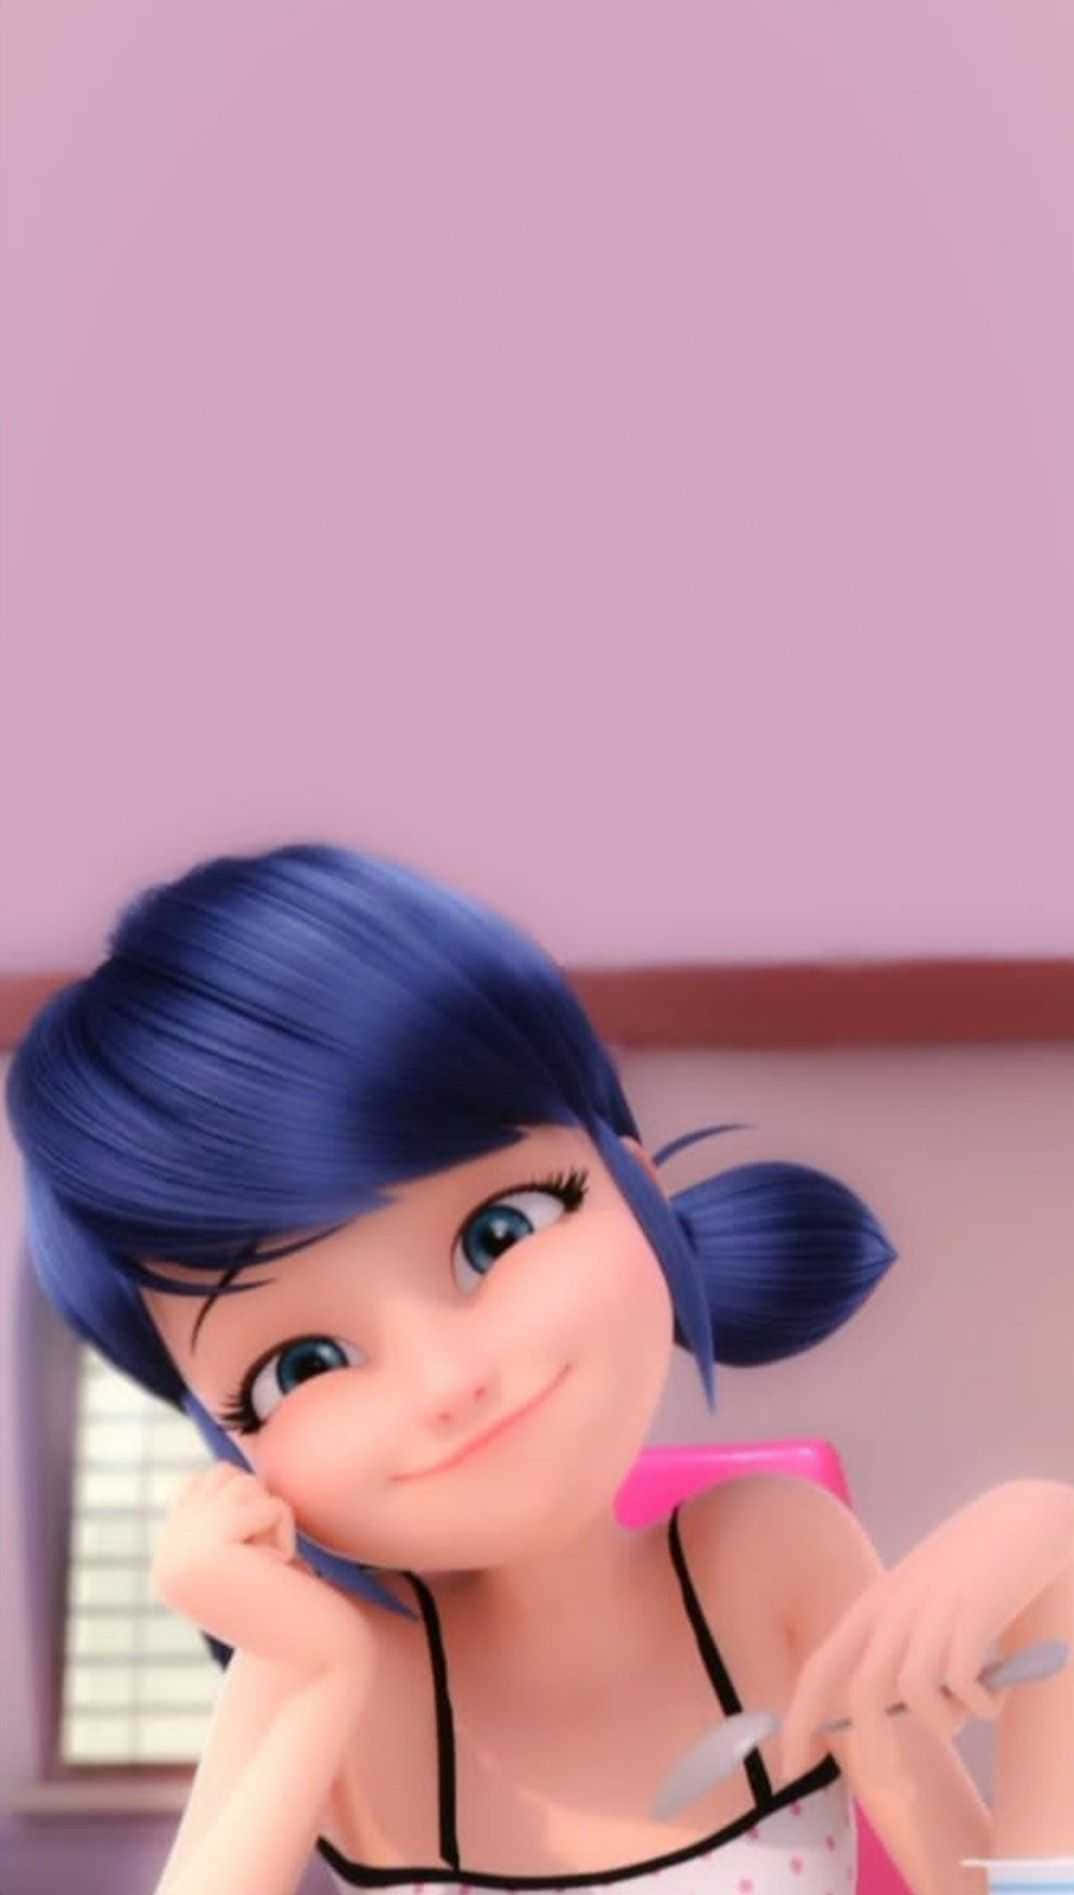 A stunning artwork featuring a close-up portrait of Marinette.